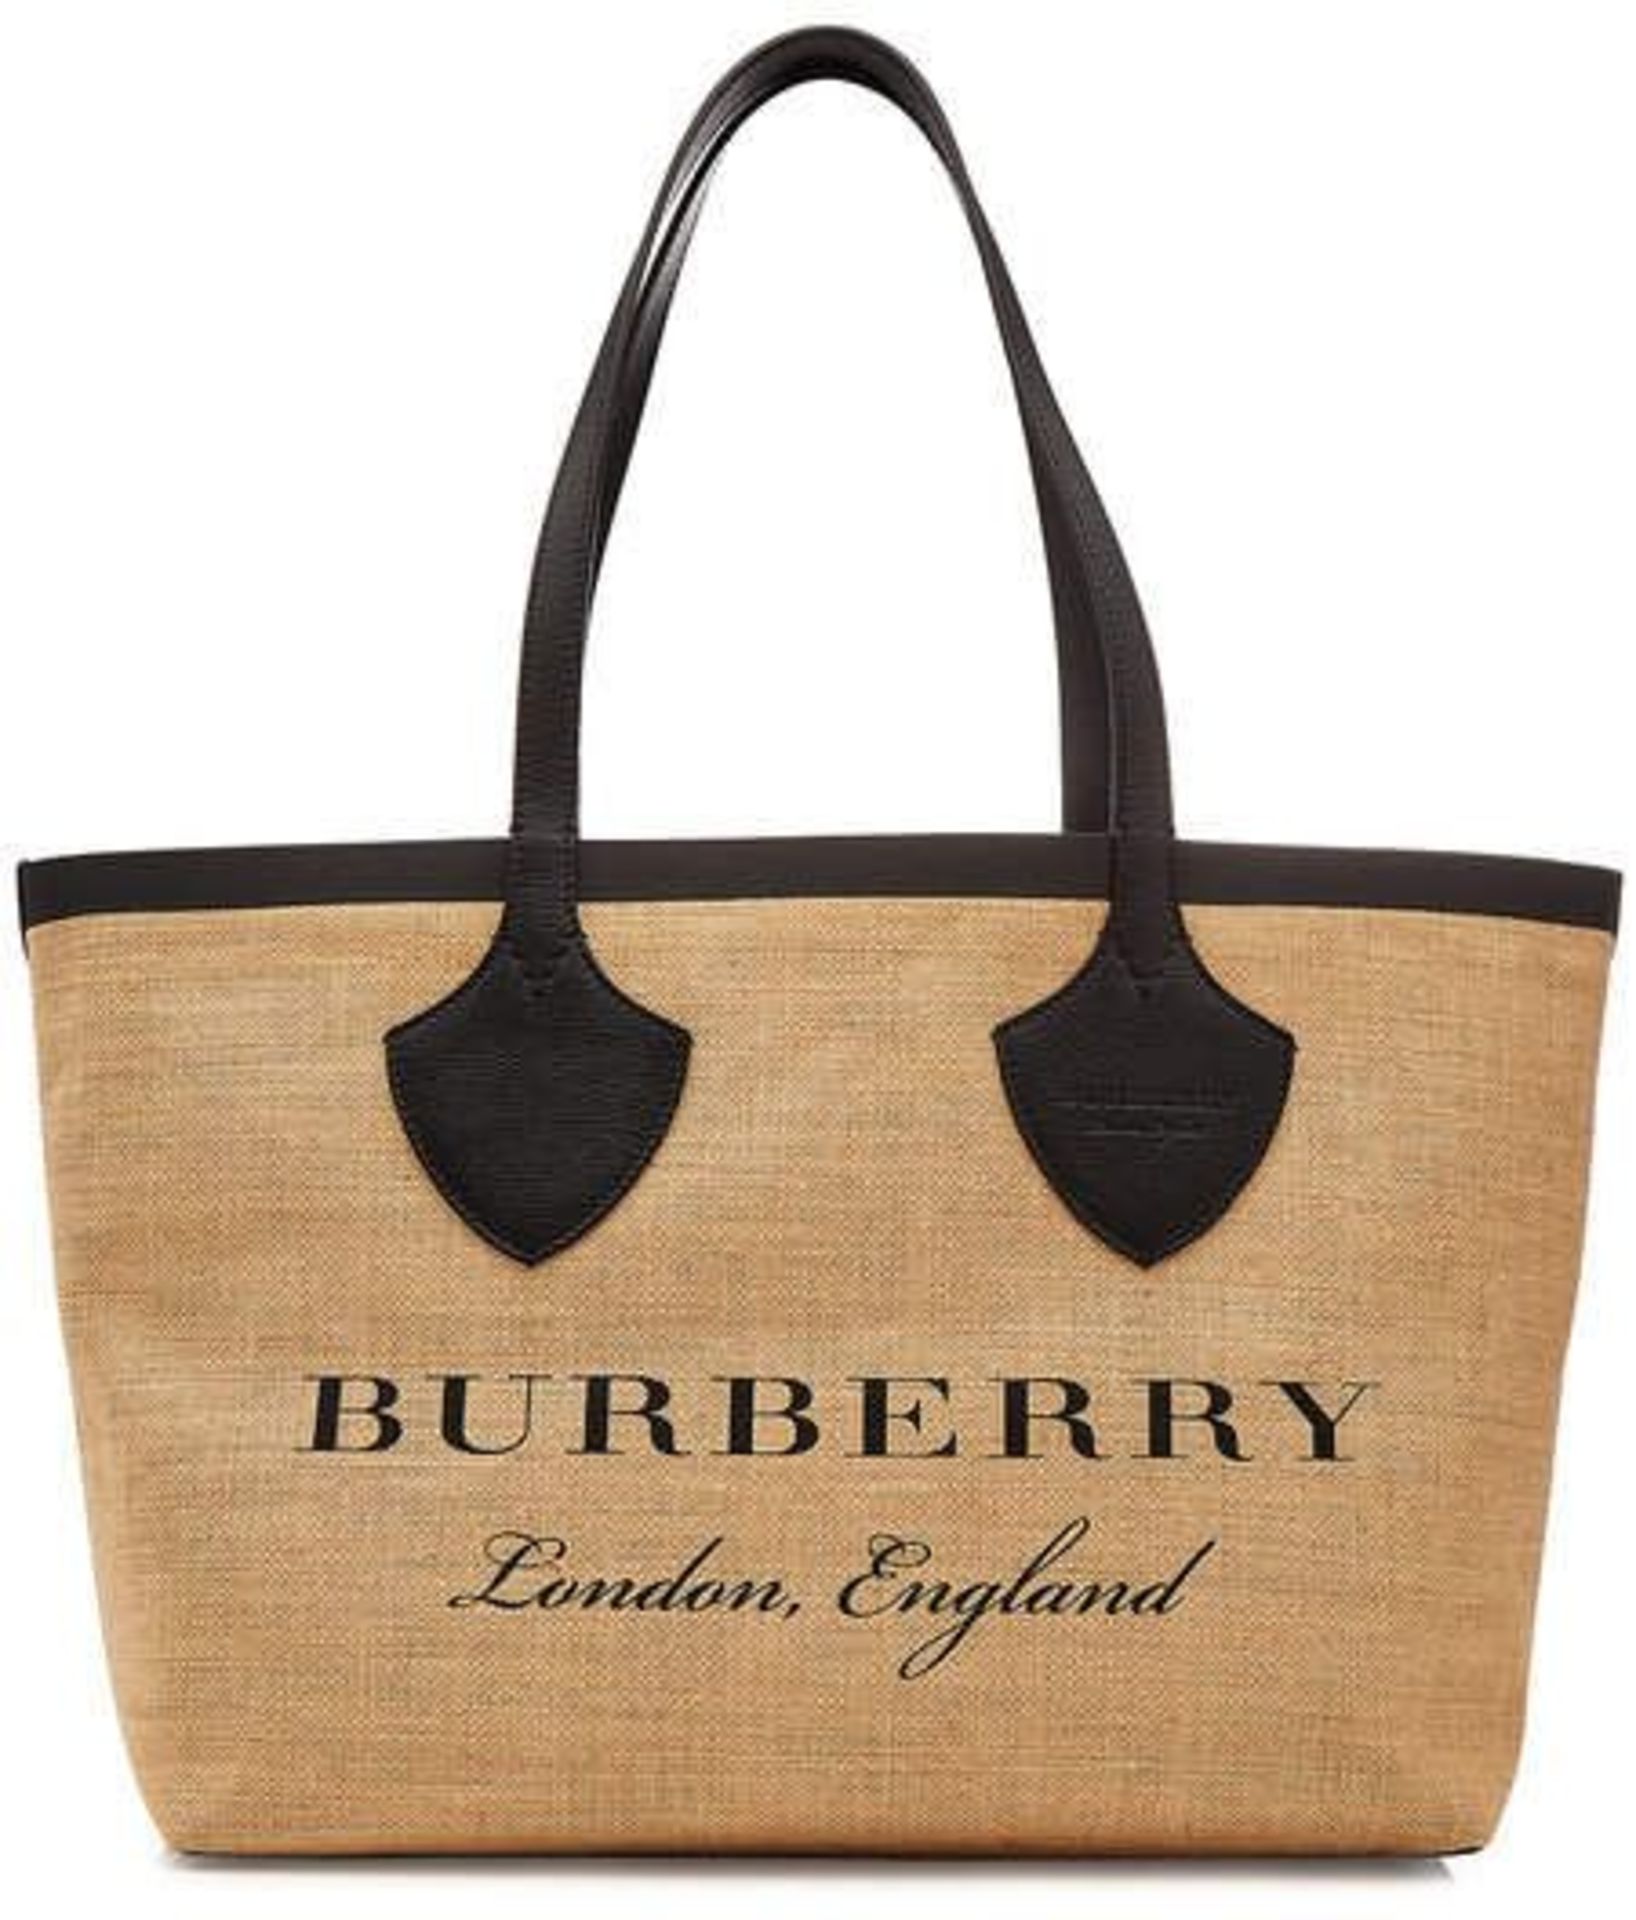 Genuine Burberry The Giant Tote Jute Bag with Leather. RRP £1,150. Spacious and versatile, this - Image 2 of 9